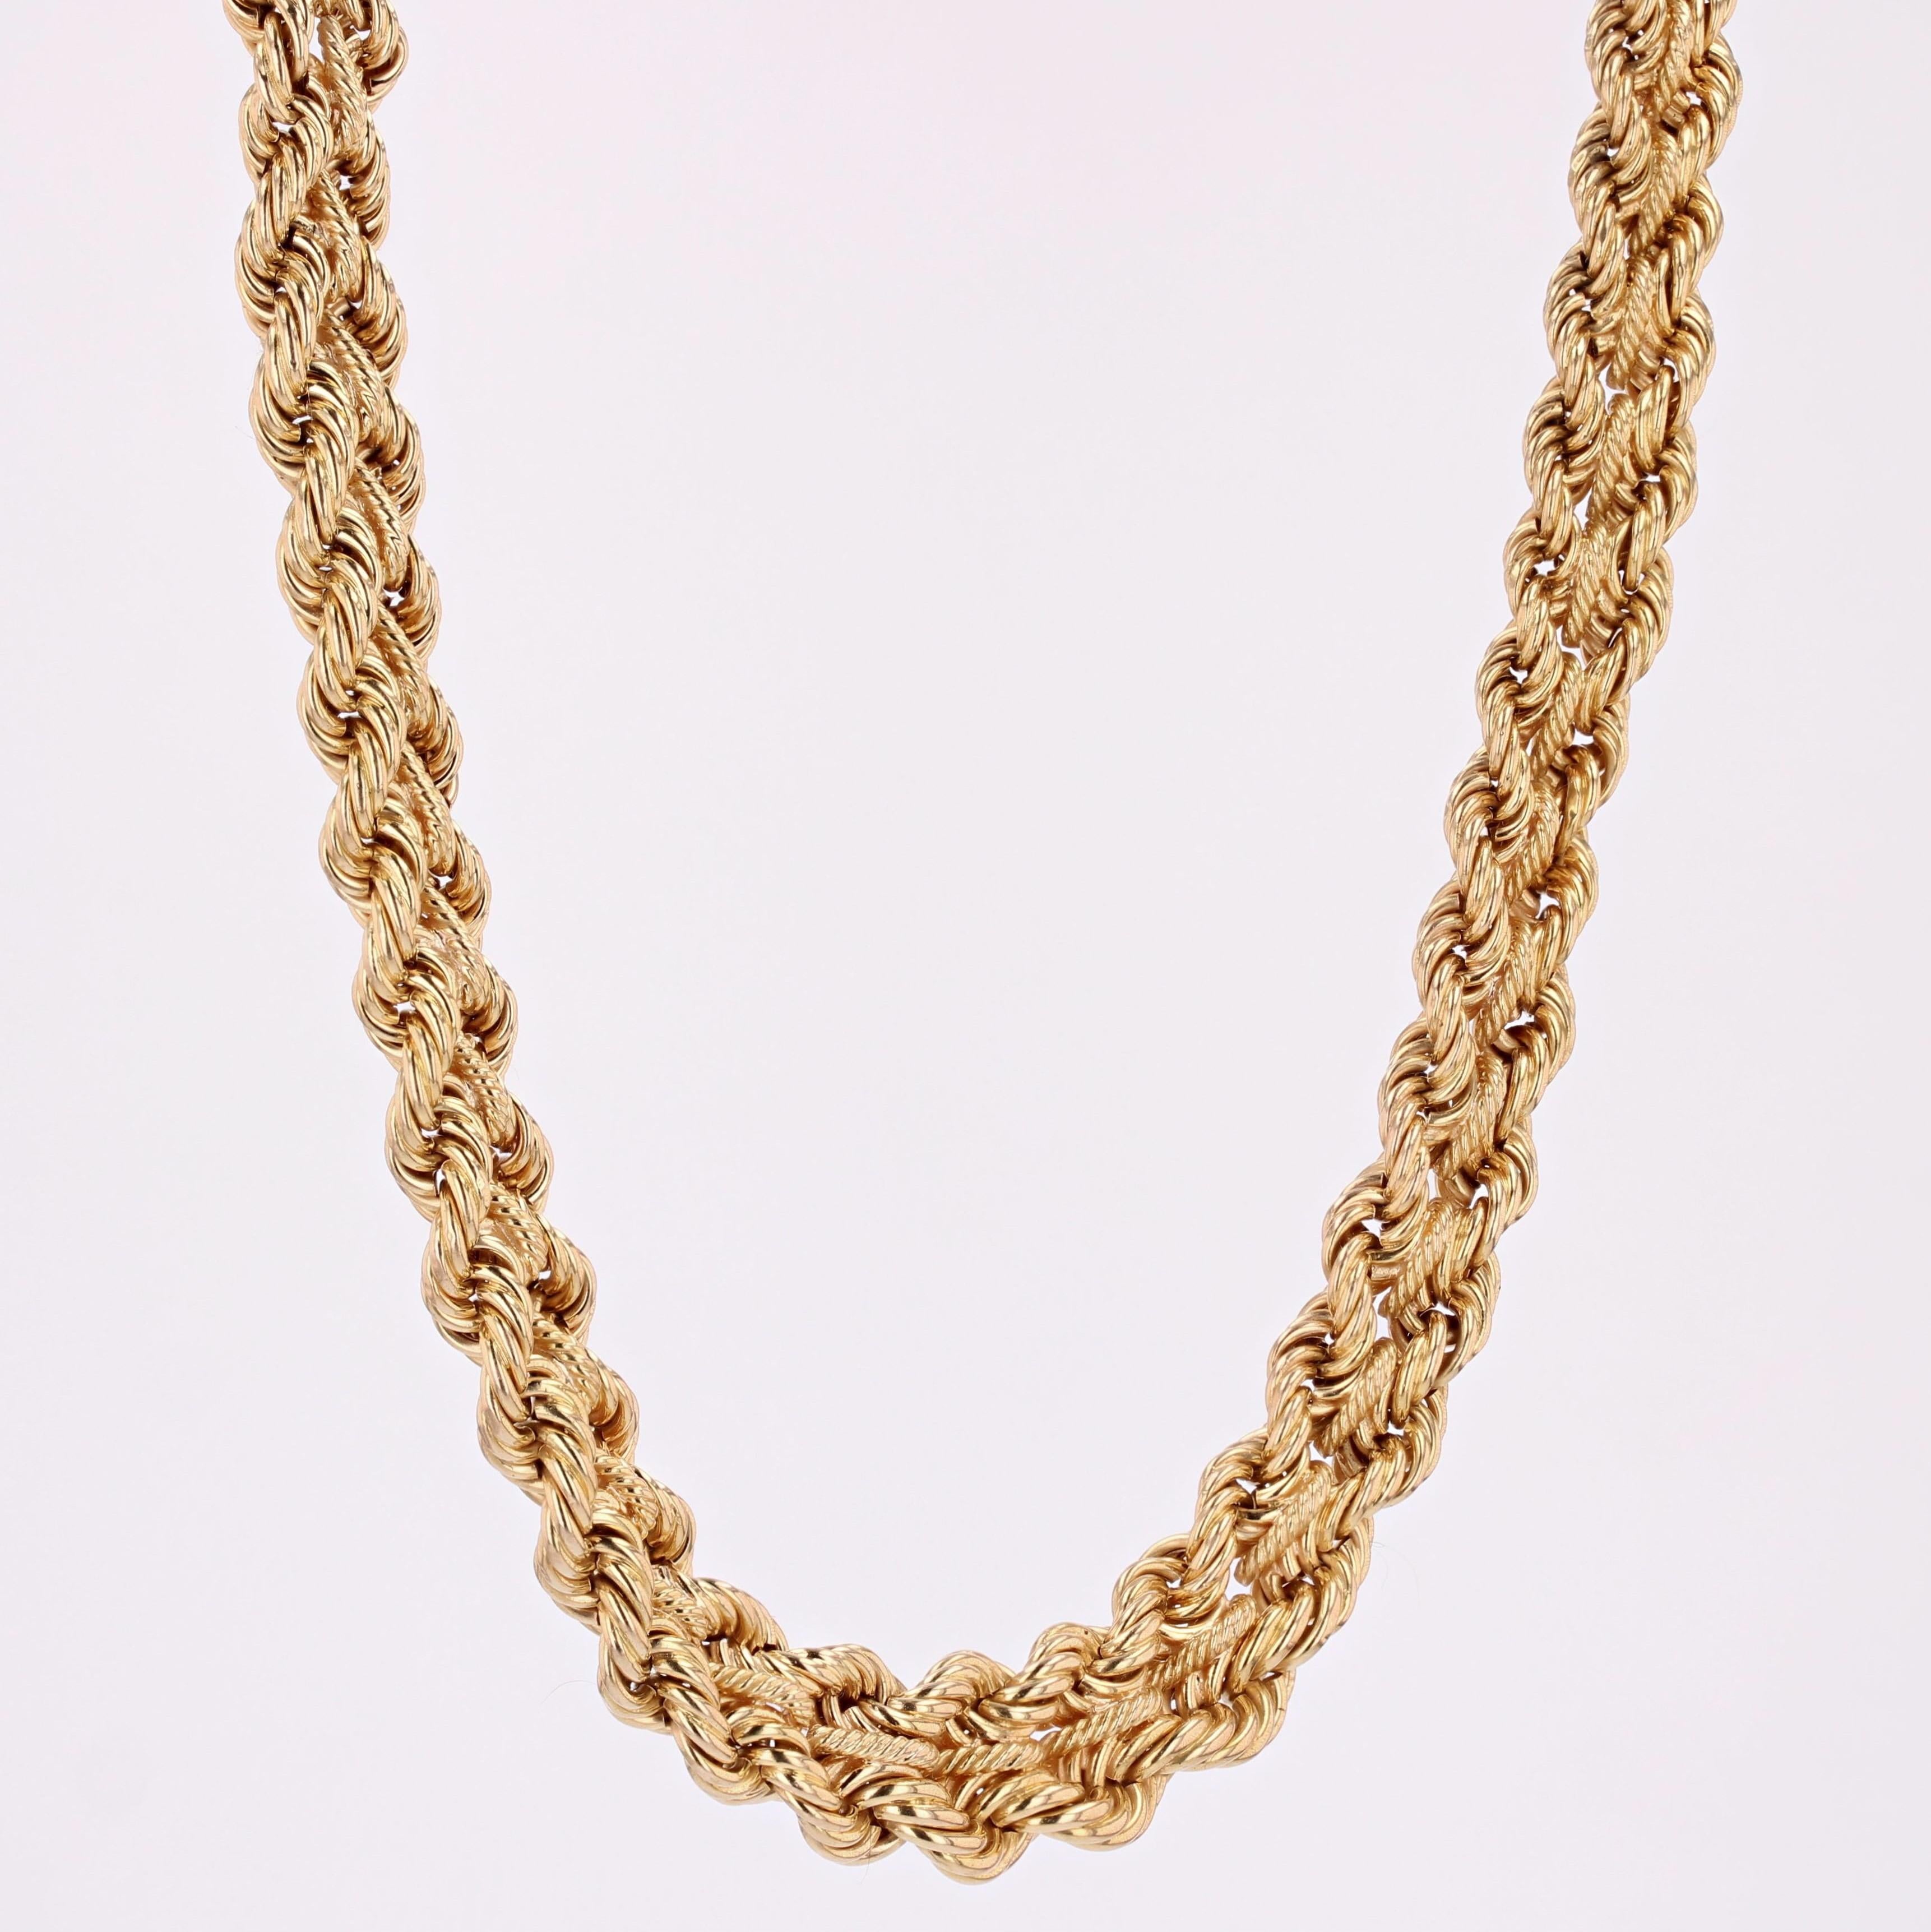 French 1950s 18 Karat Yellow Gold Falling Braided Choker Necklace For Sale 2